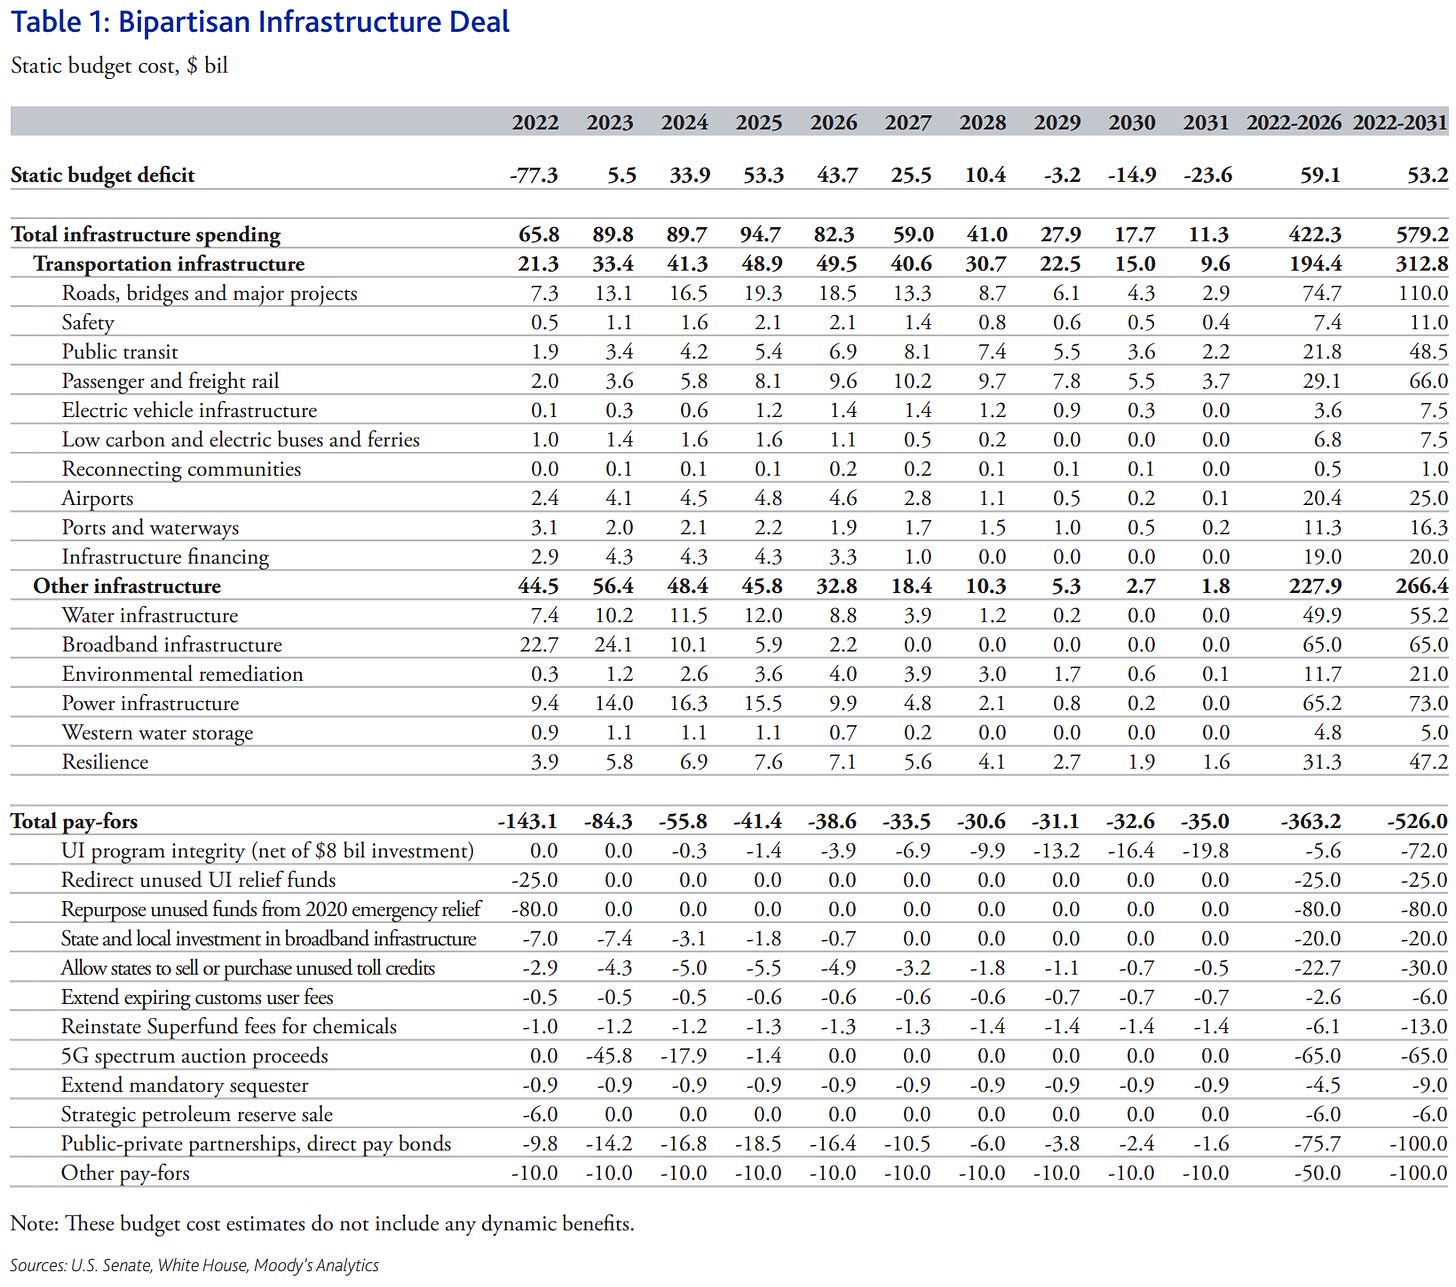 Moody's Analytics bipartisan infrastructure deal table of estimates